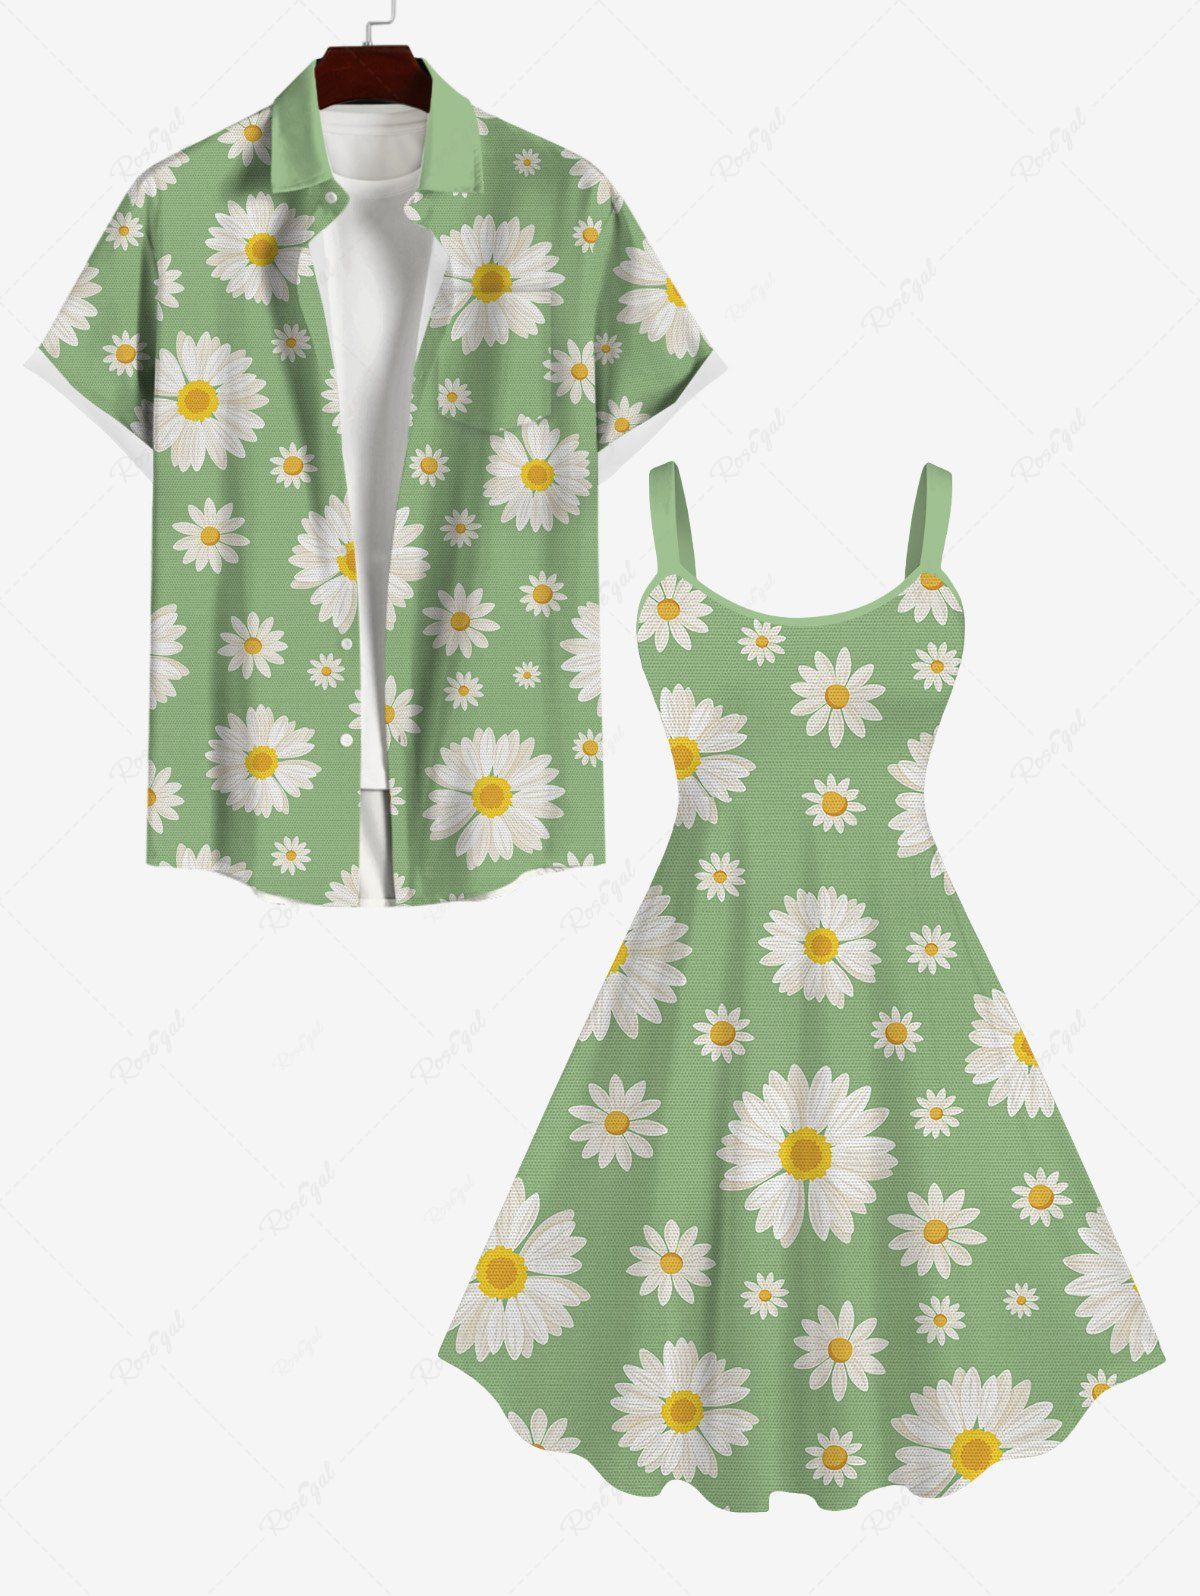 Shops Daisy Flower Print Plus Size Hawaii Beach Outfit for Couples  